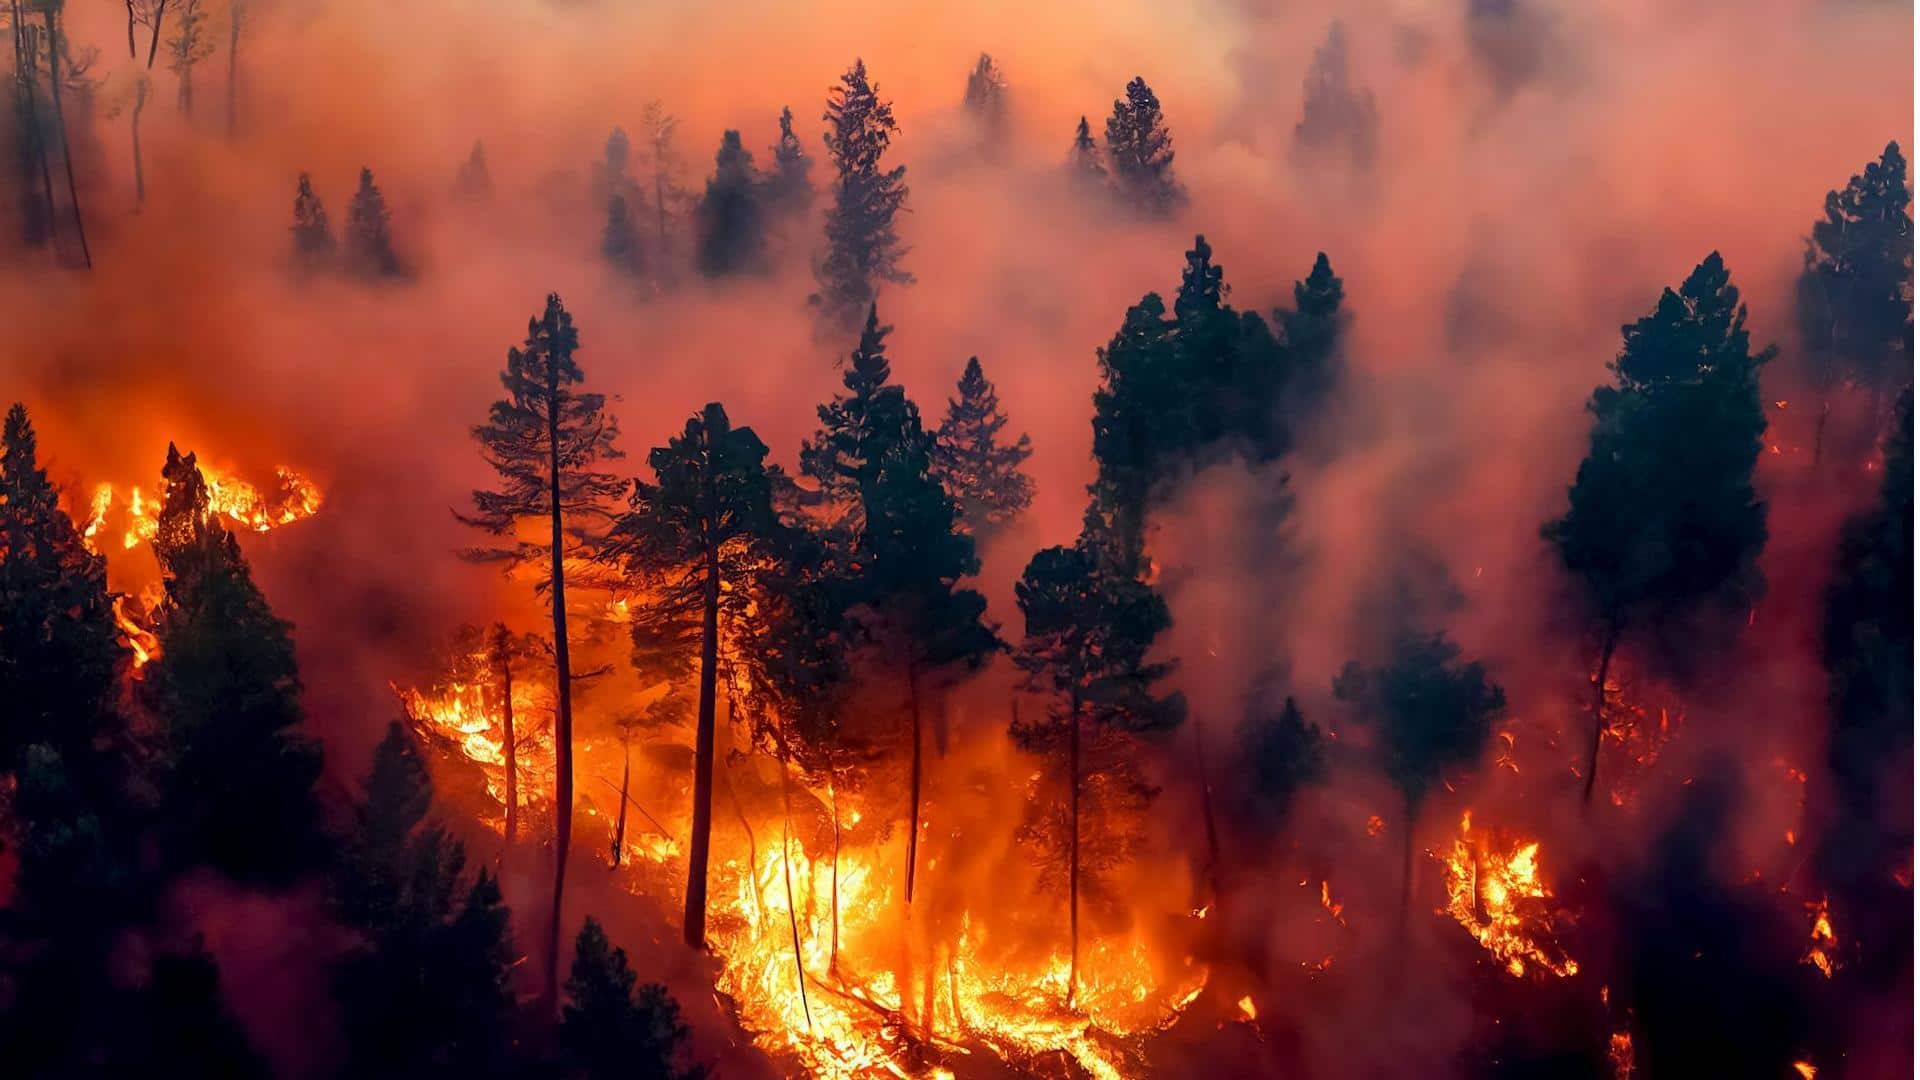 Extreme wildfires have increased twofold in just 2 decades: Study